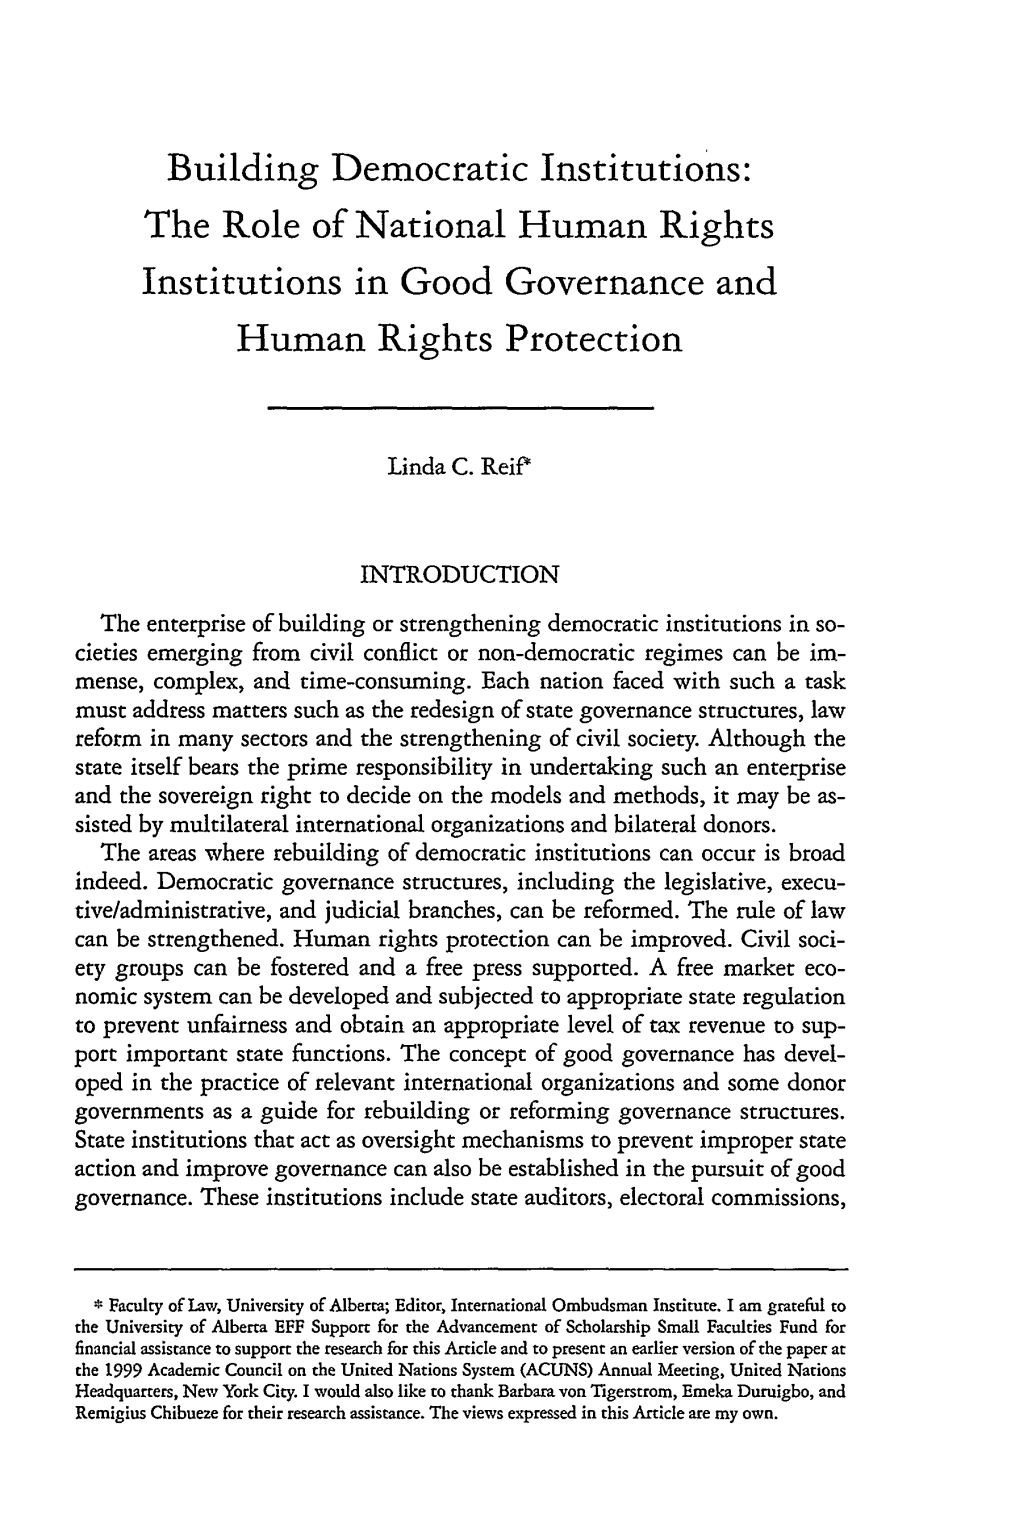 Building Democratic Institutions: the Role of National Human Rights Institutions in Good Governance and Human Rights Protection